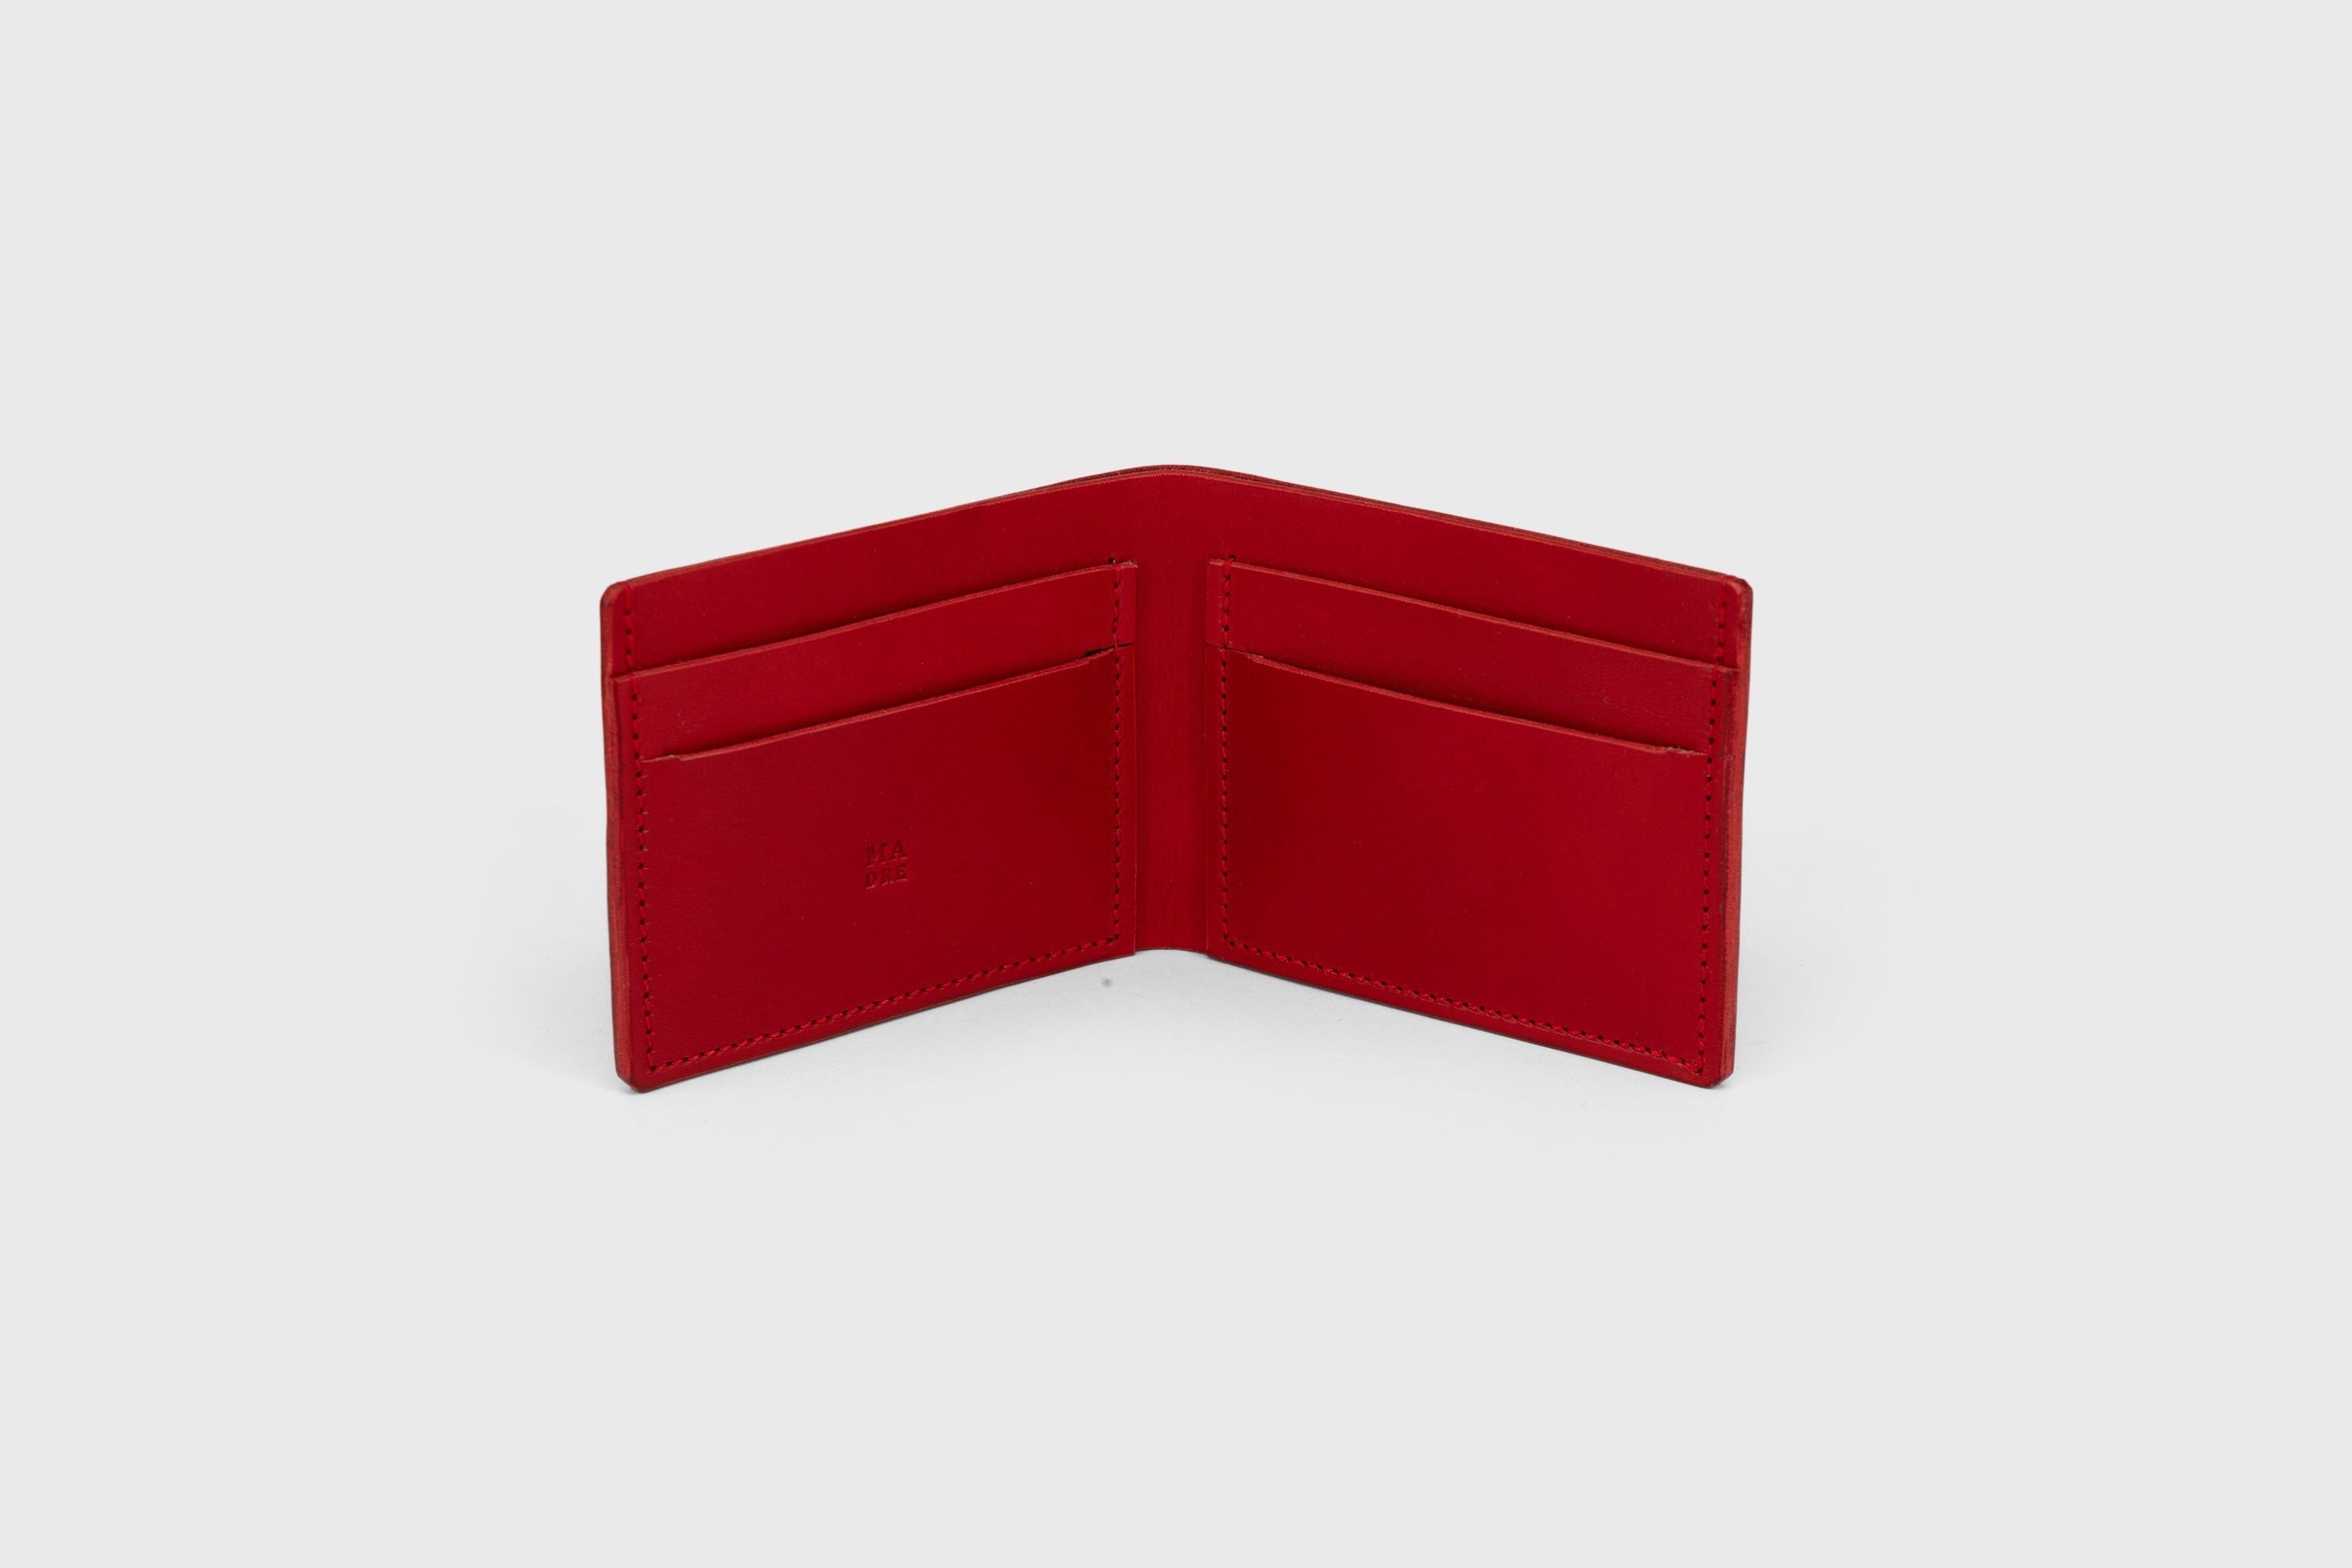 Bifold Wallet Red Leather Vegetable Tanned Leather Premium Classic Design and Handcrafted By Atelier Madre Manuel Dreeesmann Barcelona Spain